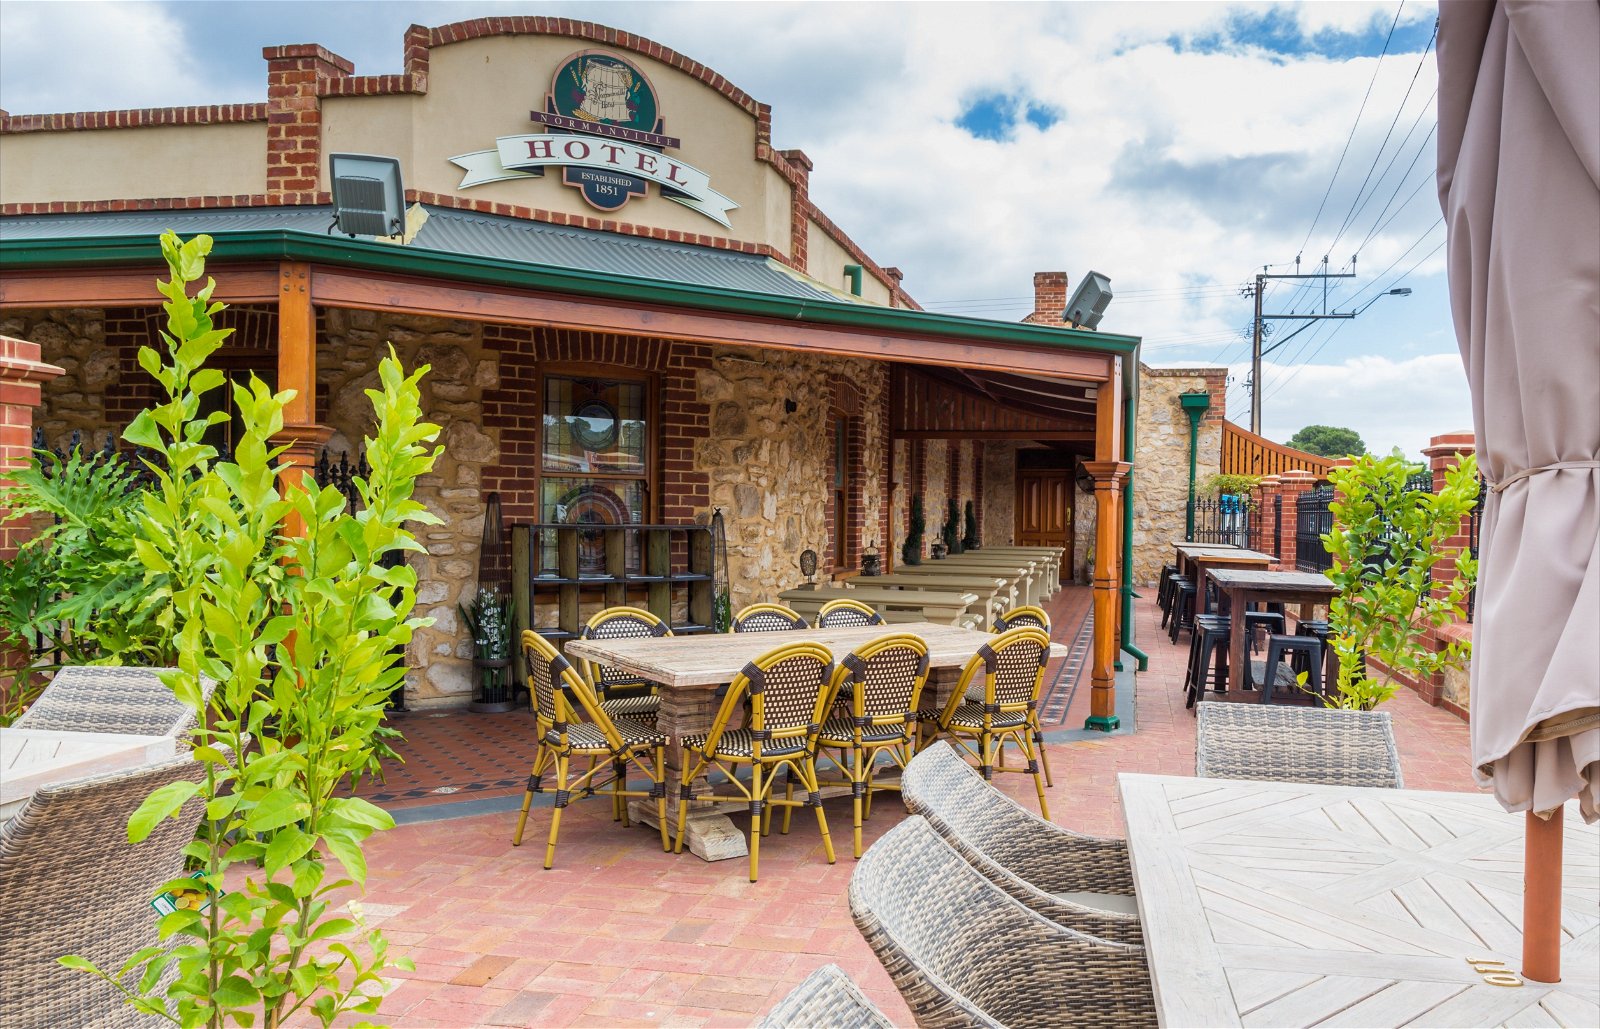 Normanville Hotel - Northern Rivers Accommodation